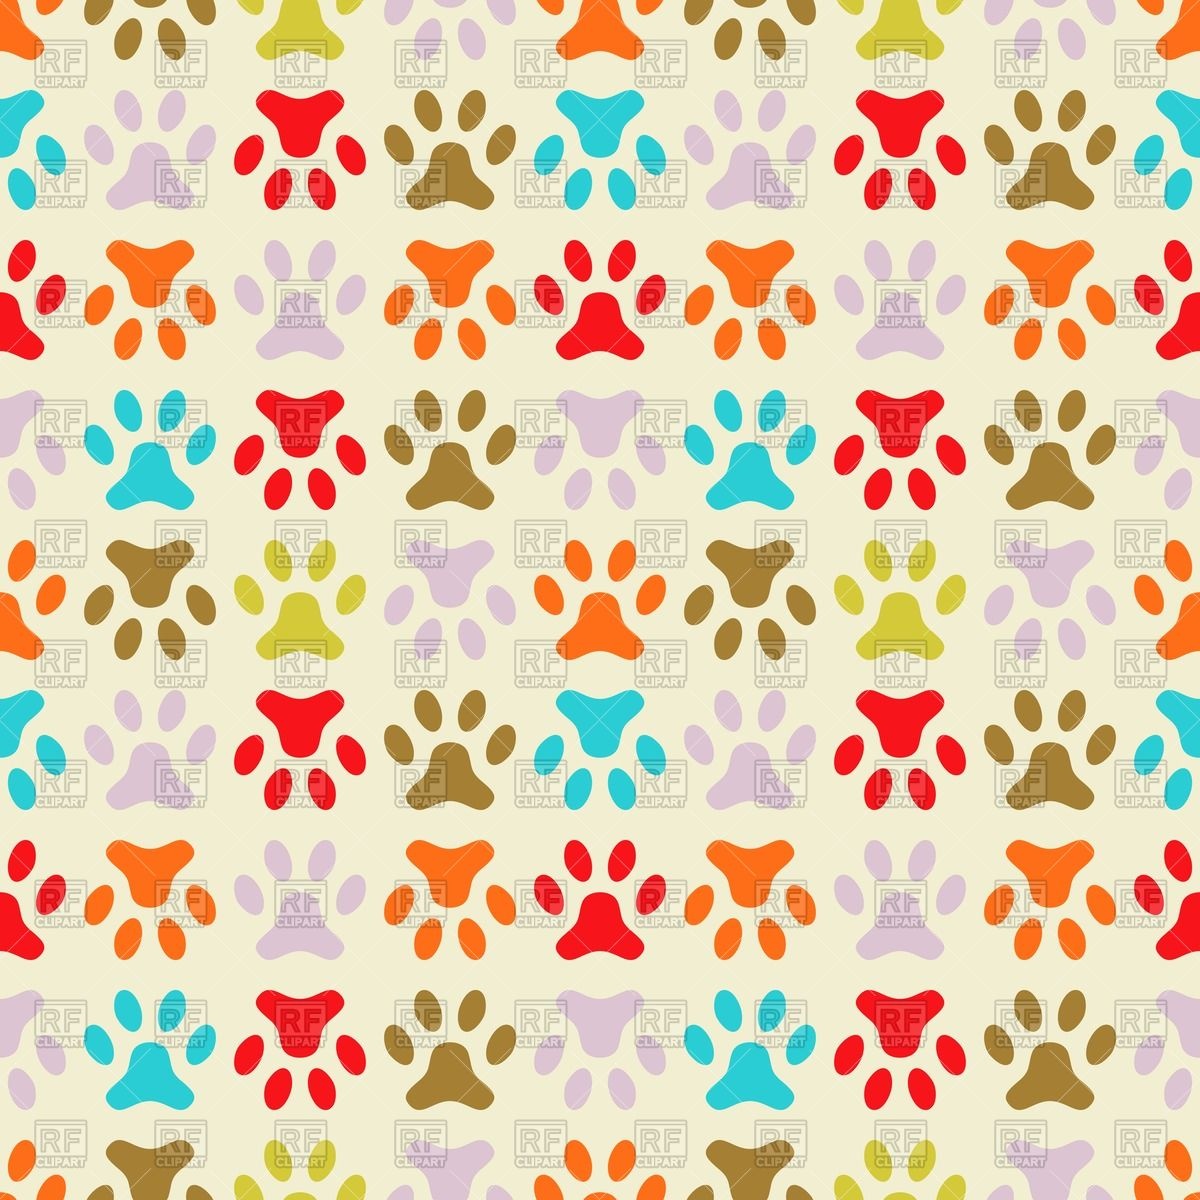 Colorful Wallpaper With Dog's Paw Prints Vector Image - Cartoon Paw Print Background , HD Wallpaper & Backgrounds